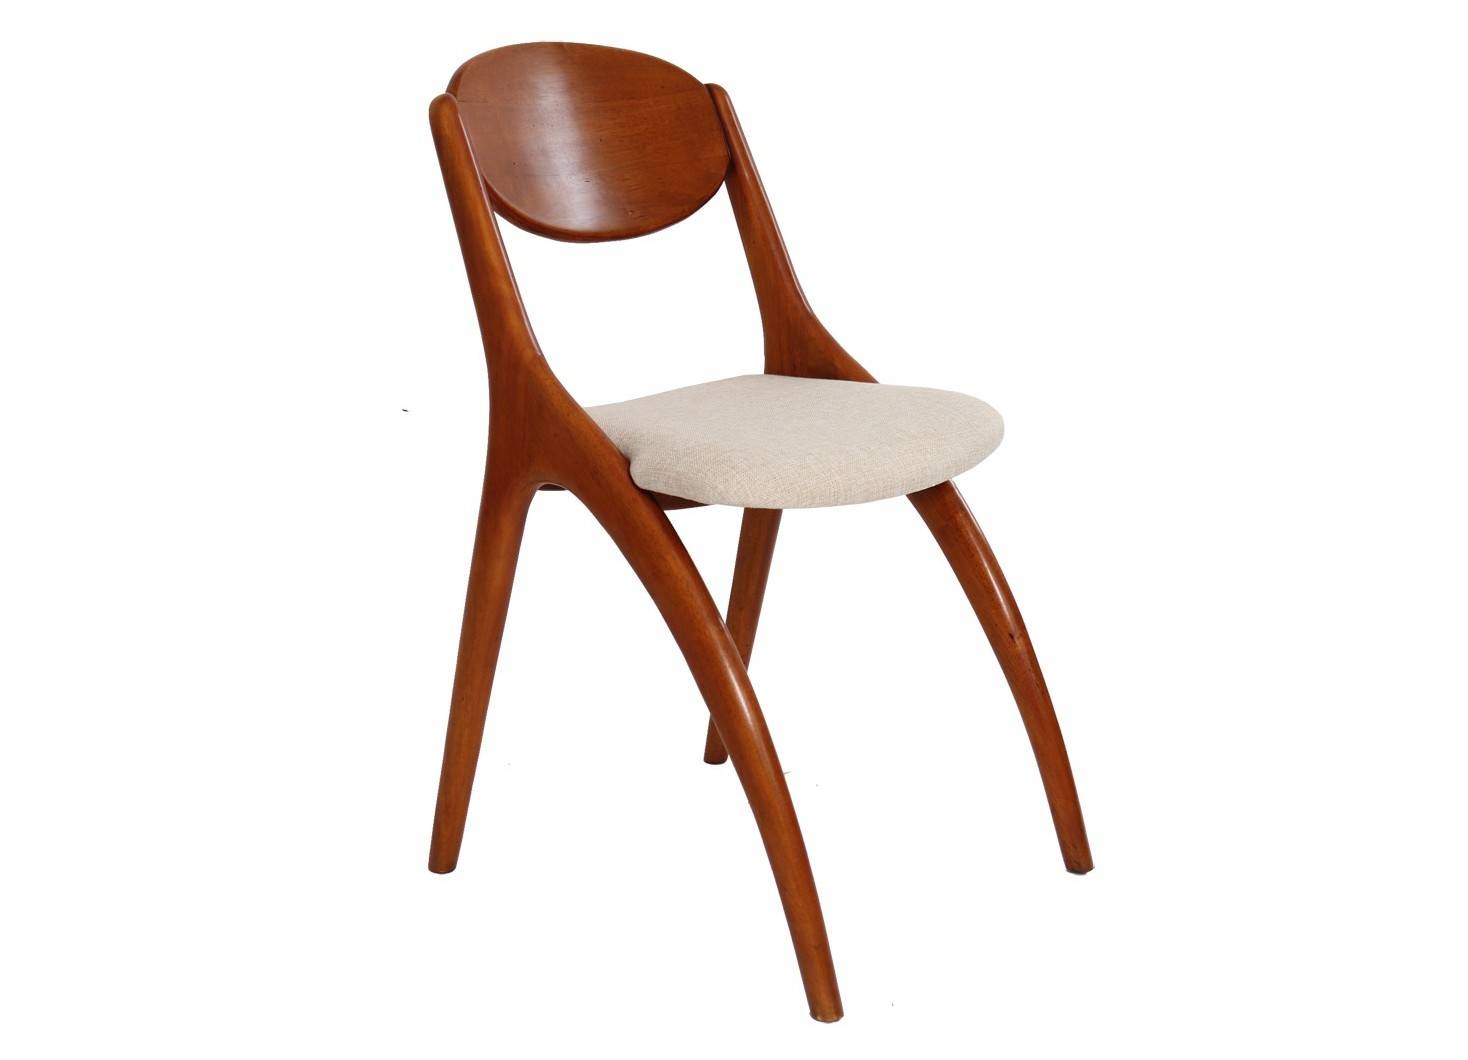 Nordic chair in beige fabric